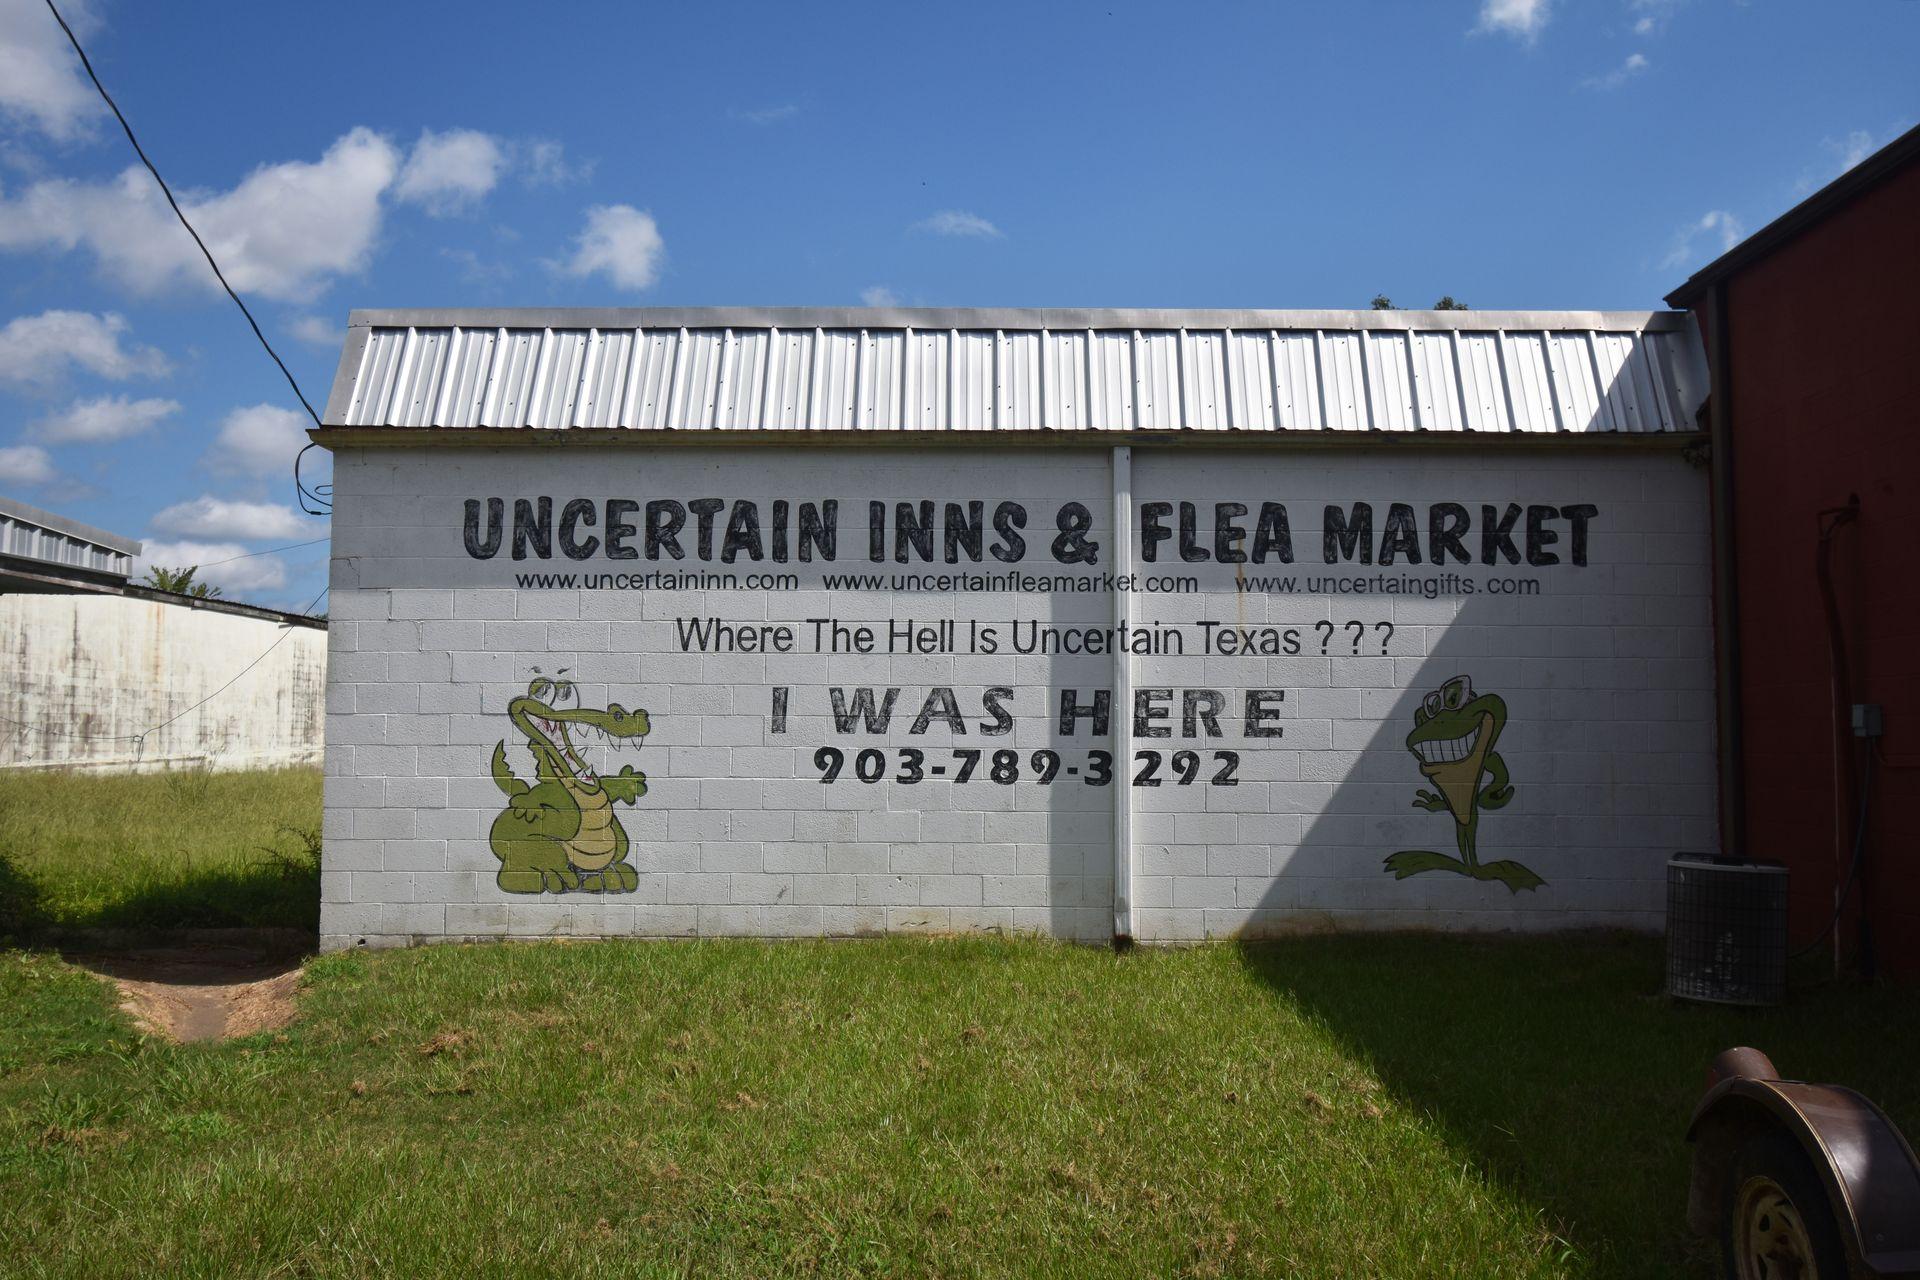 A mural reading "Uncertain Inns and Flea Market," "Where the hell is Uncertain, Texas???" and "I was here"